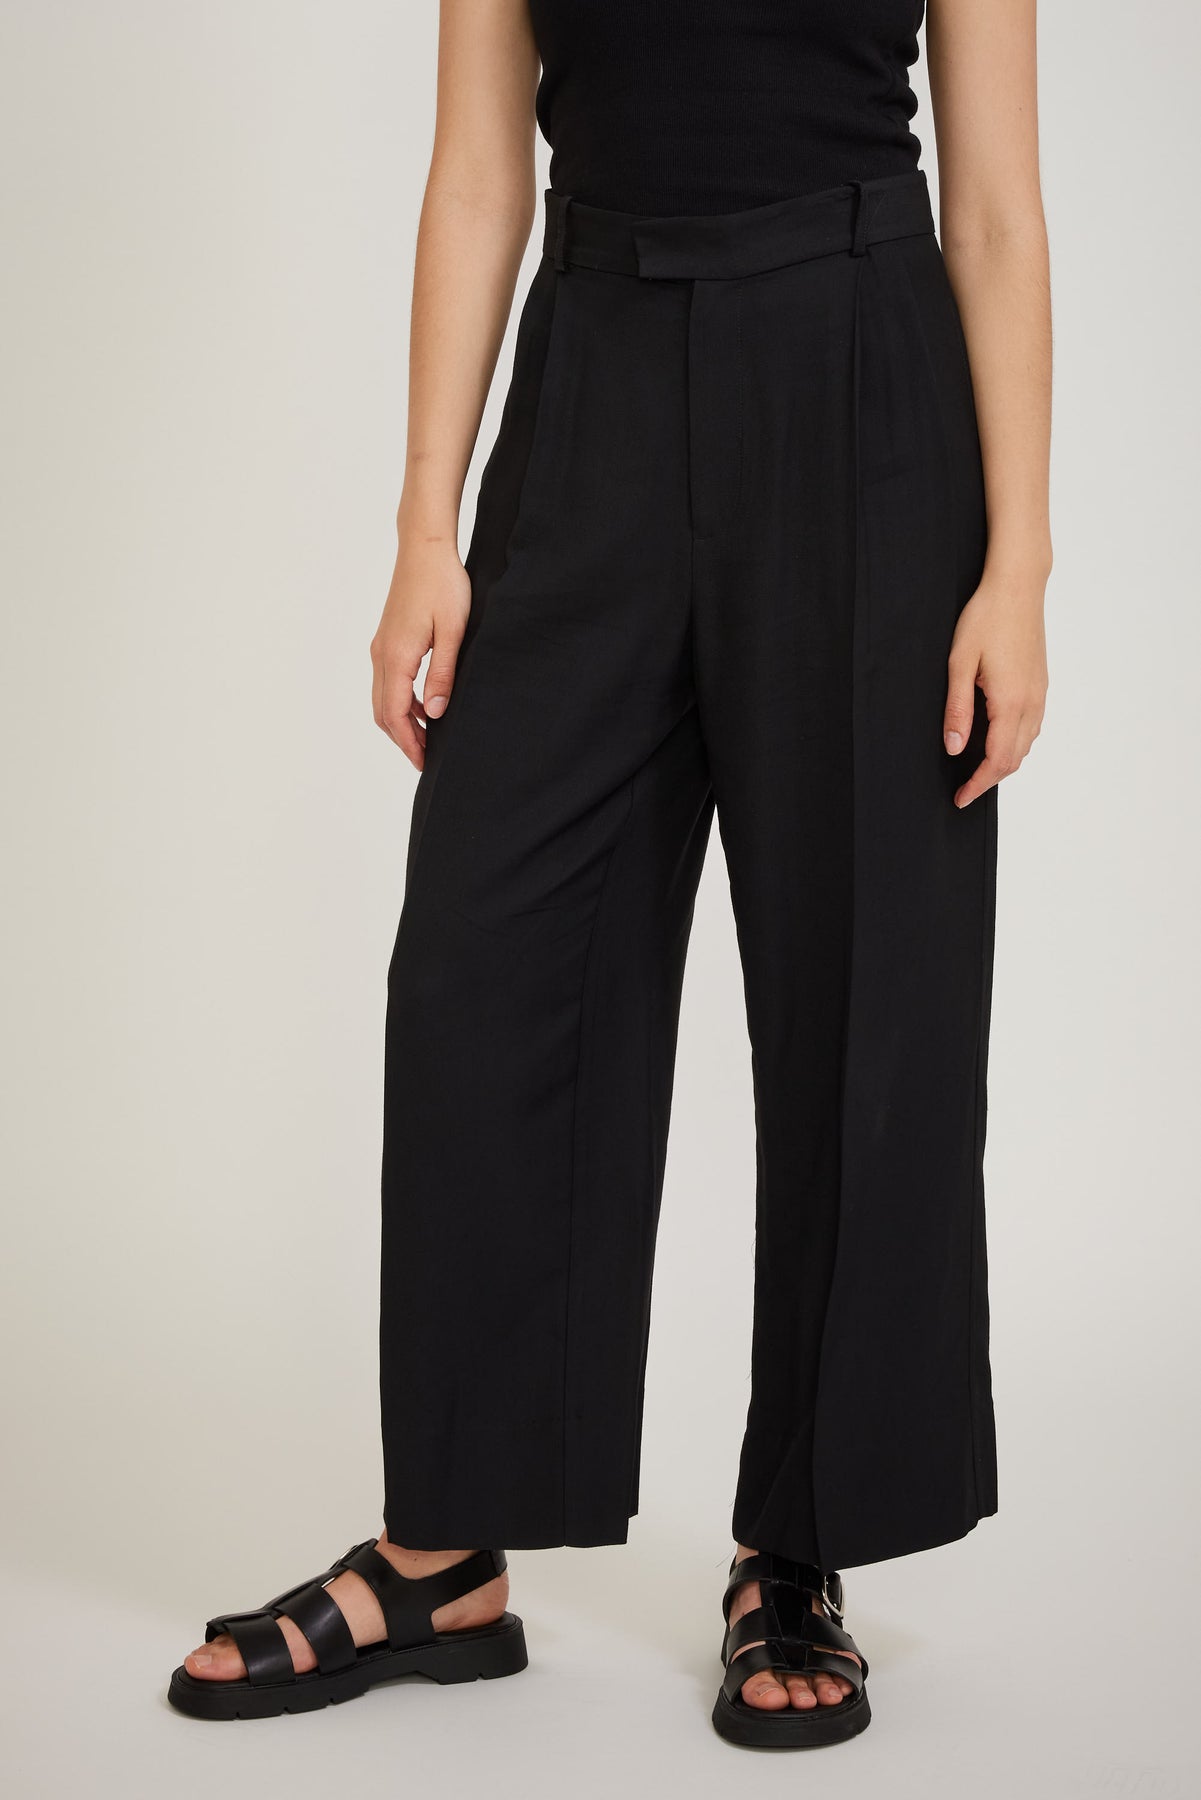 Cutting loose Three ways to style slouchy trousers  Thats Not My Age